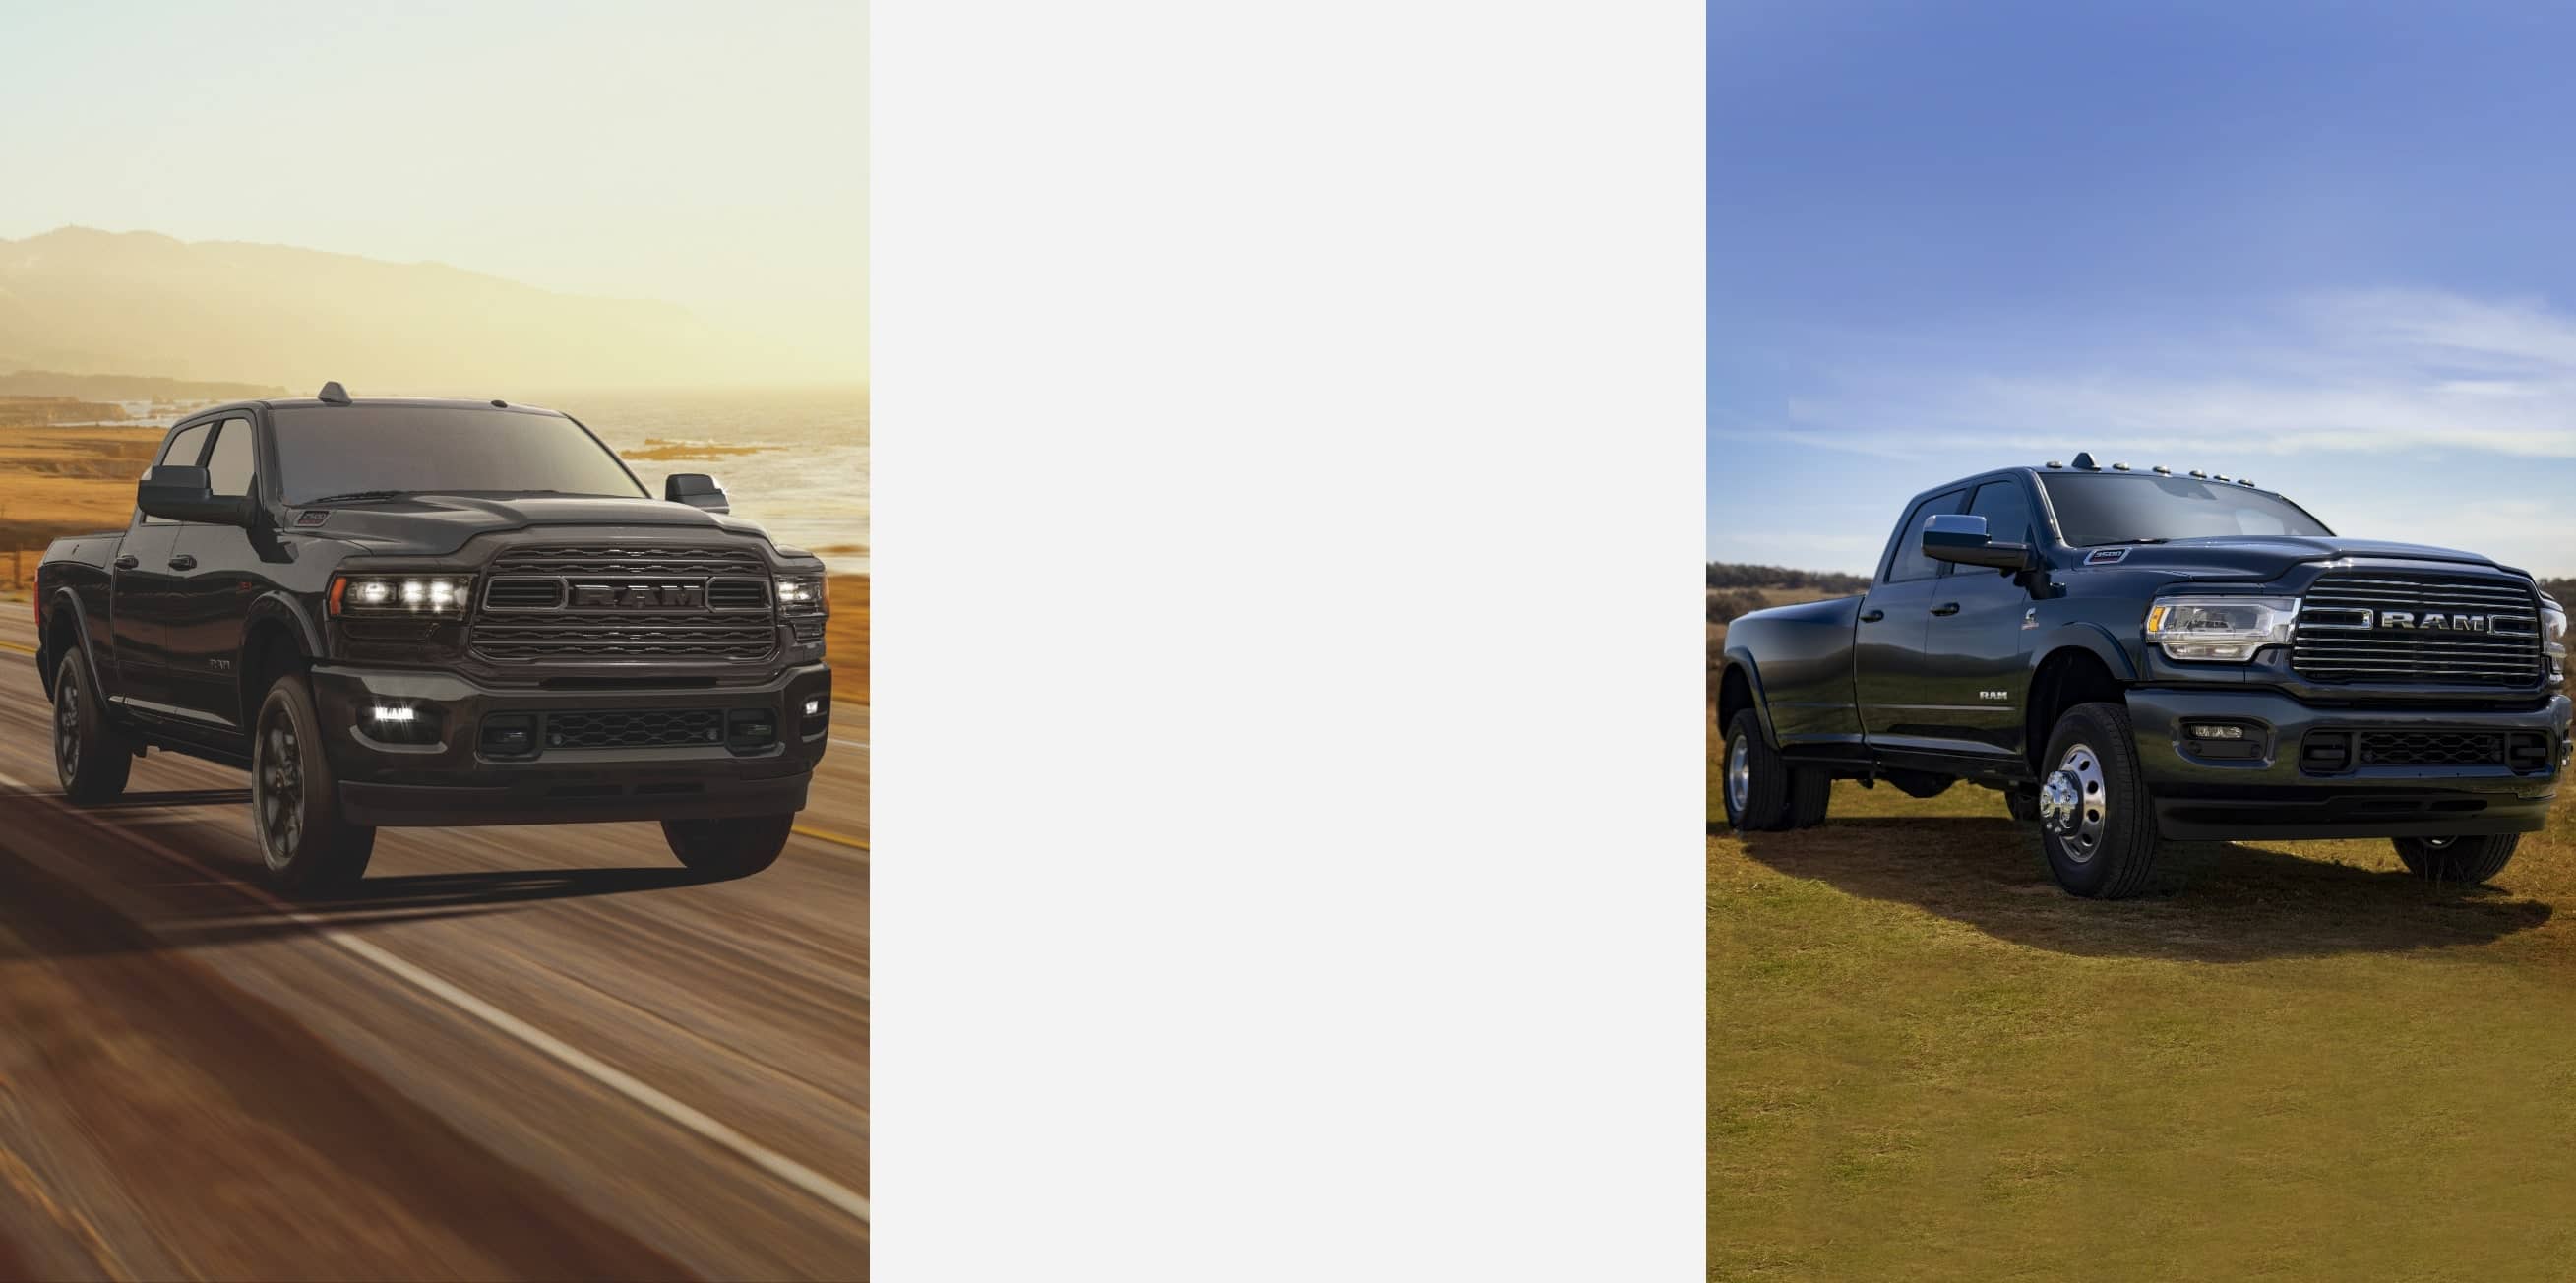 The 2021 Ram 2500 being driven on a road with the background blurred to indicate its speed. The 2021 Ram 3500 parked off-road in a grassy field.